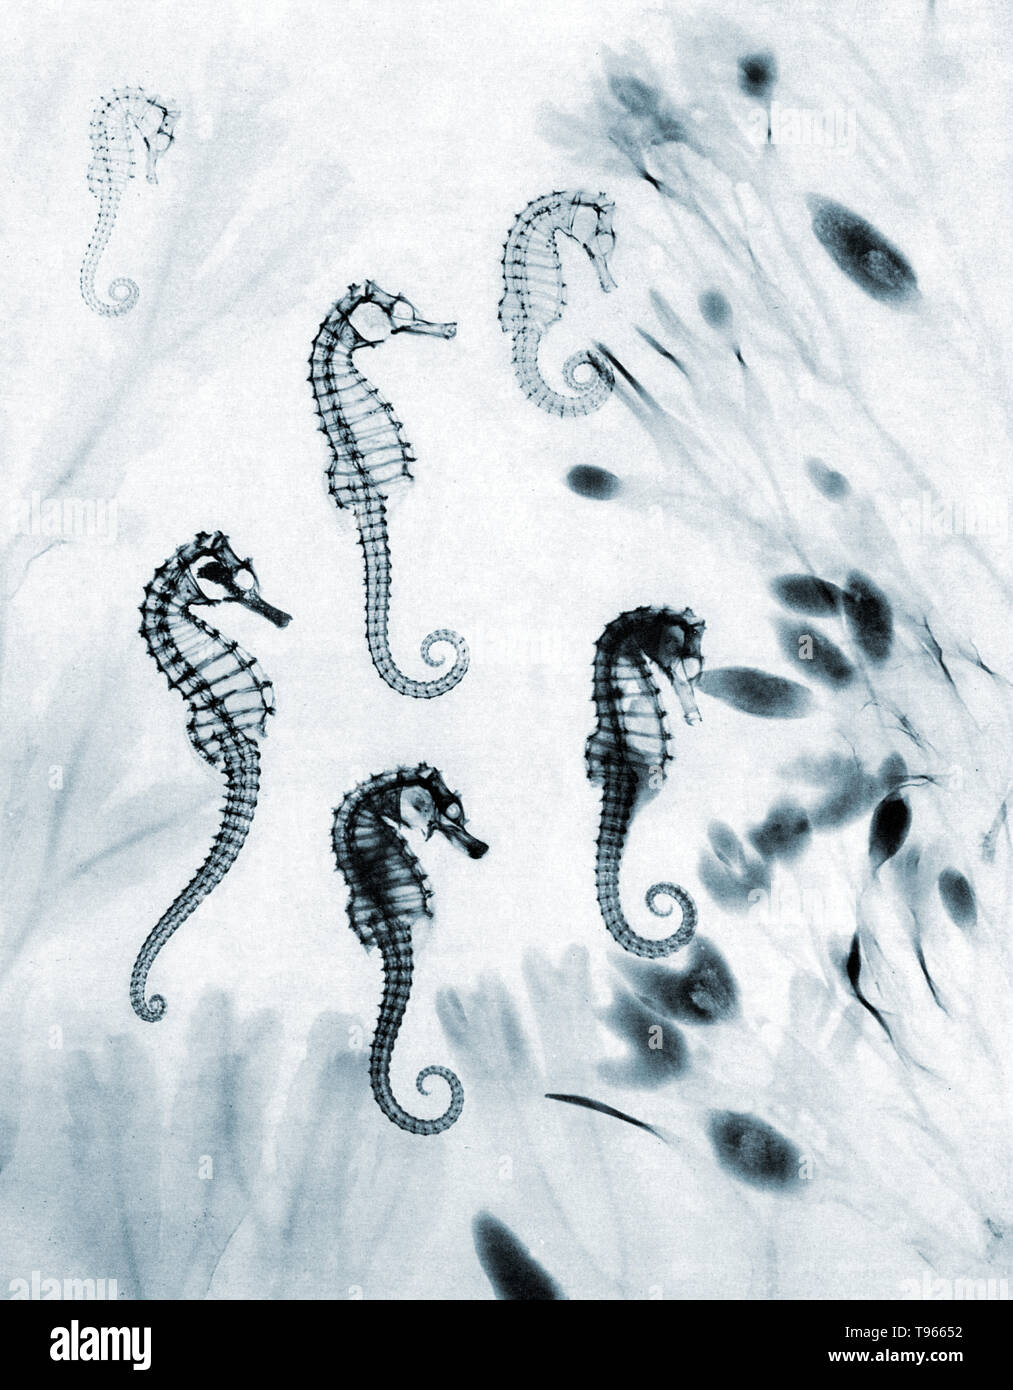 Historical x-ray of seahorses (Hippocampus sp.). The ones that look hollow have been dead for while and are dried out. The others are newly dead, and some internal organs can be seen. The seaweed around the seahorses is serrated wrack (Fucus serratus) at left and bladder wrack (Fucus vesiculosus) at right. This x-ray was made by E. C. le Grice, and was published in London Illustrated News on 12th August 1933. Stock Photo